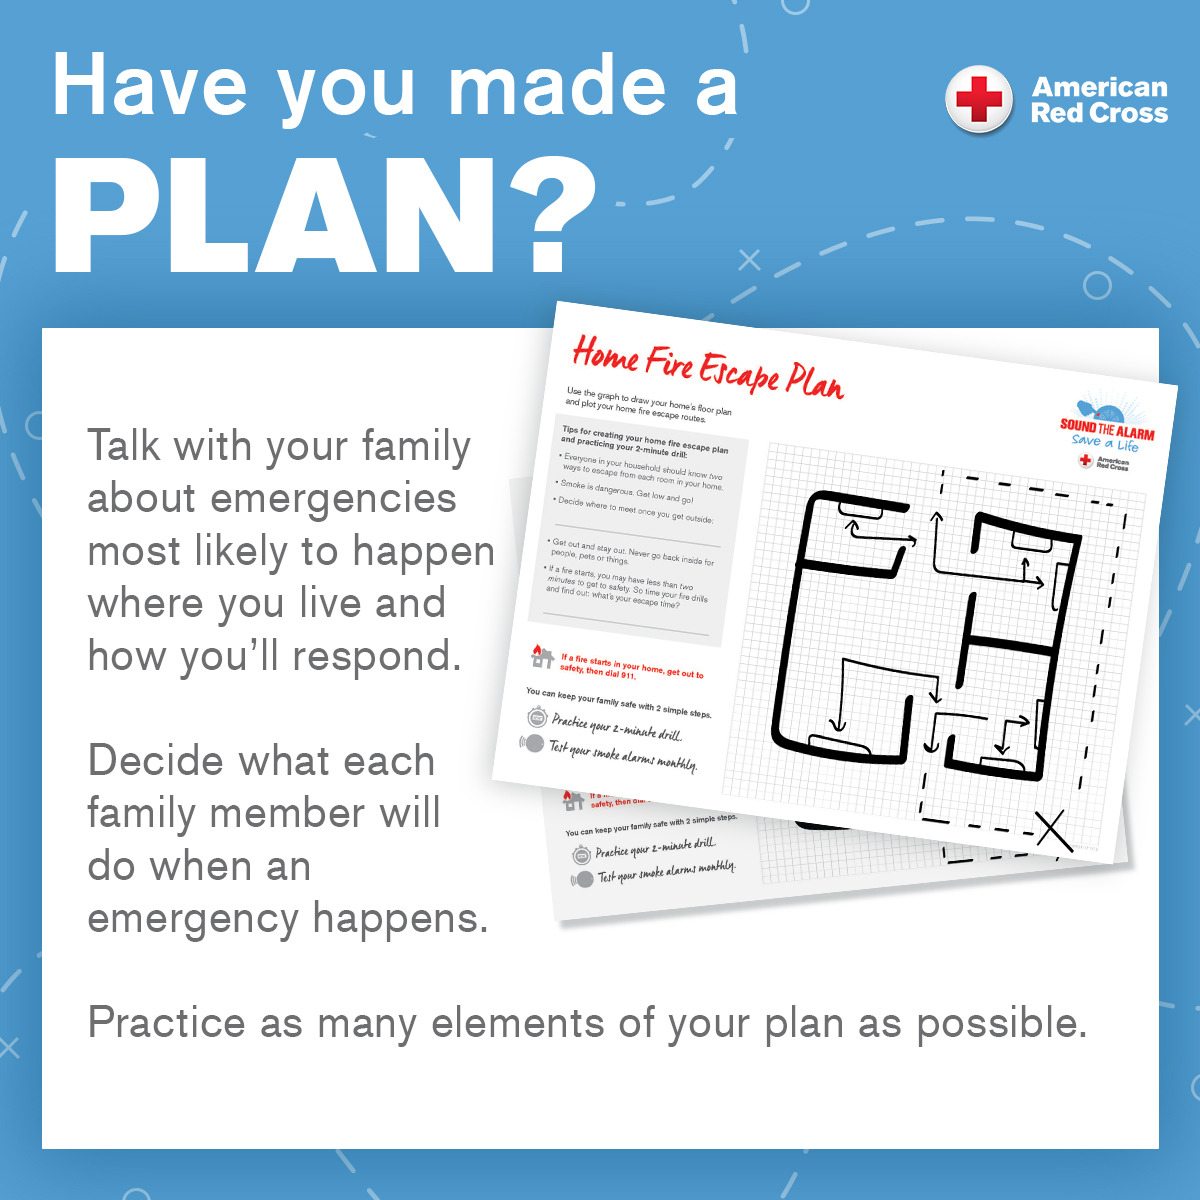 Now is the time to prepare for emergencies. Make a kit, make a plan, be prepared. Download the free Red Cross Emergency app. rdcrss.org/3UxV3S6